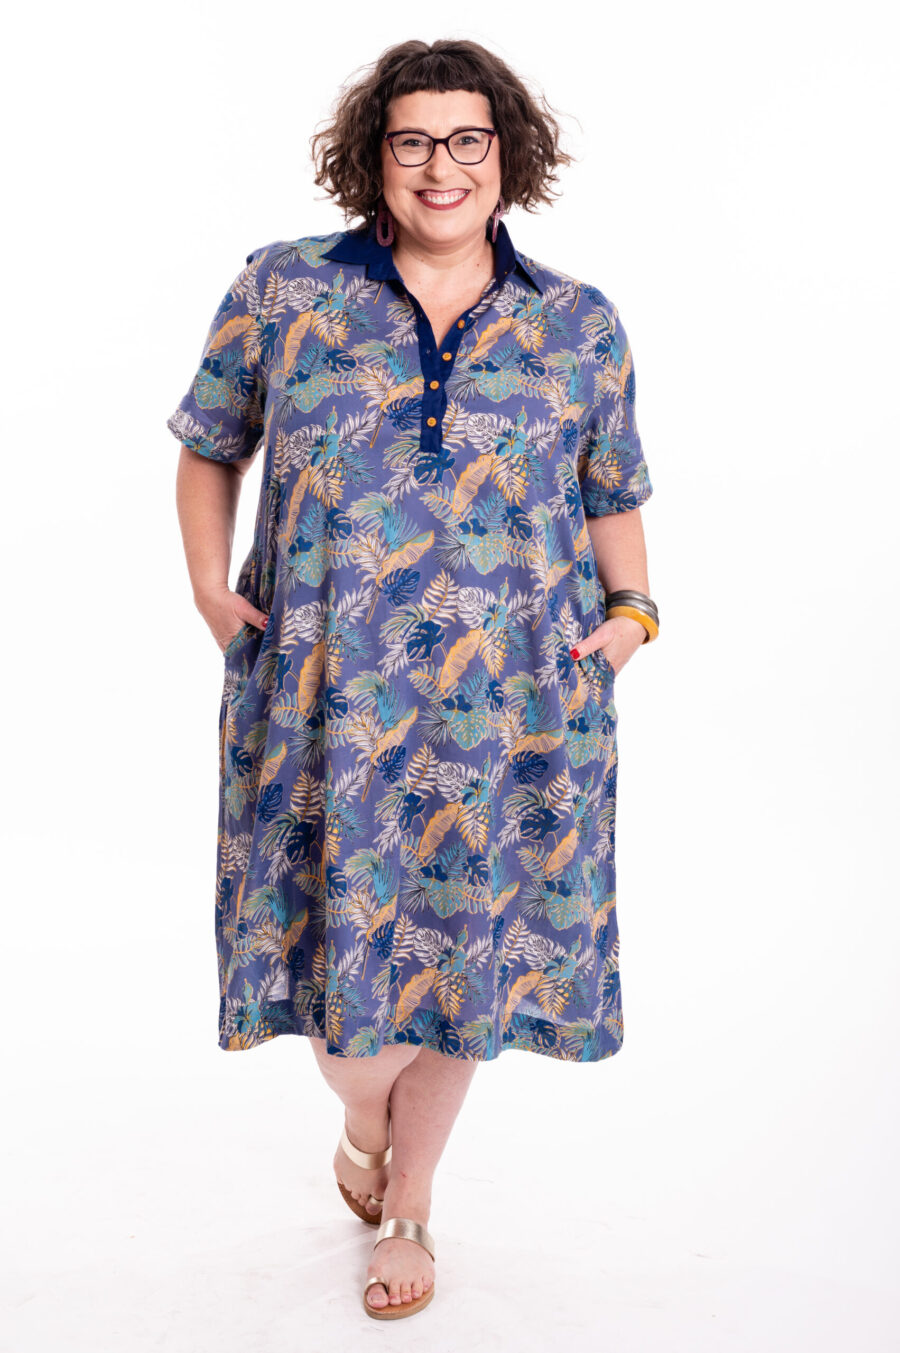 Eve dress | Uniquely designed dress - Midi blue dress with golden blue print, golden decorated leaves on a blue background